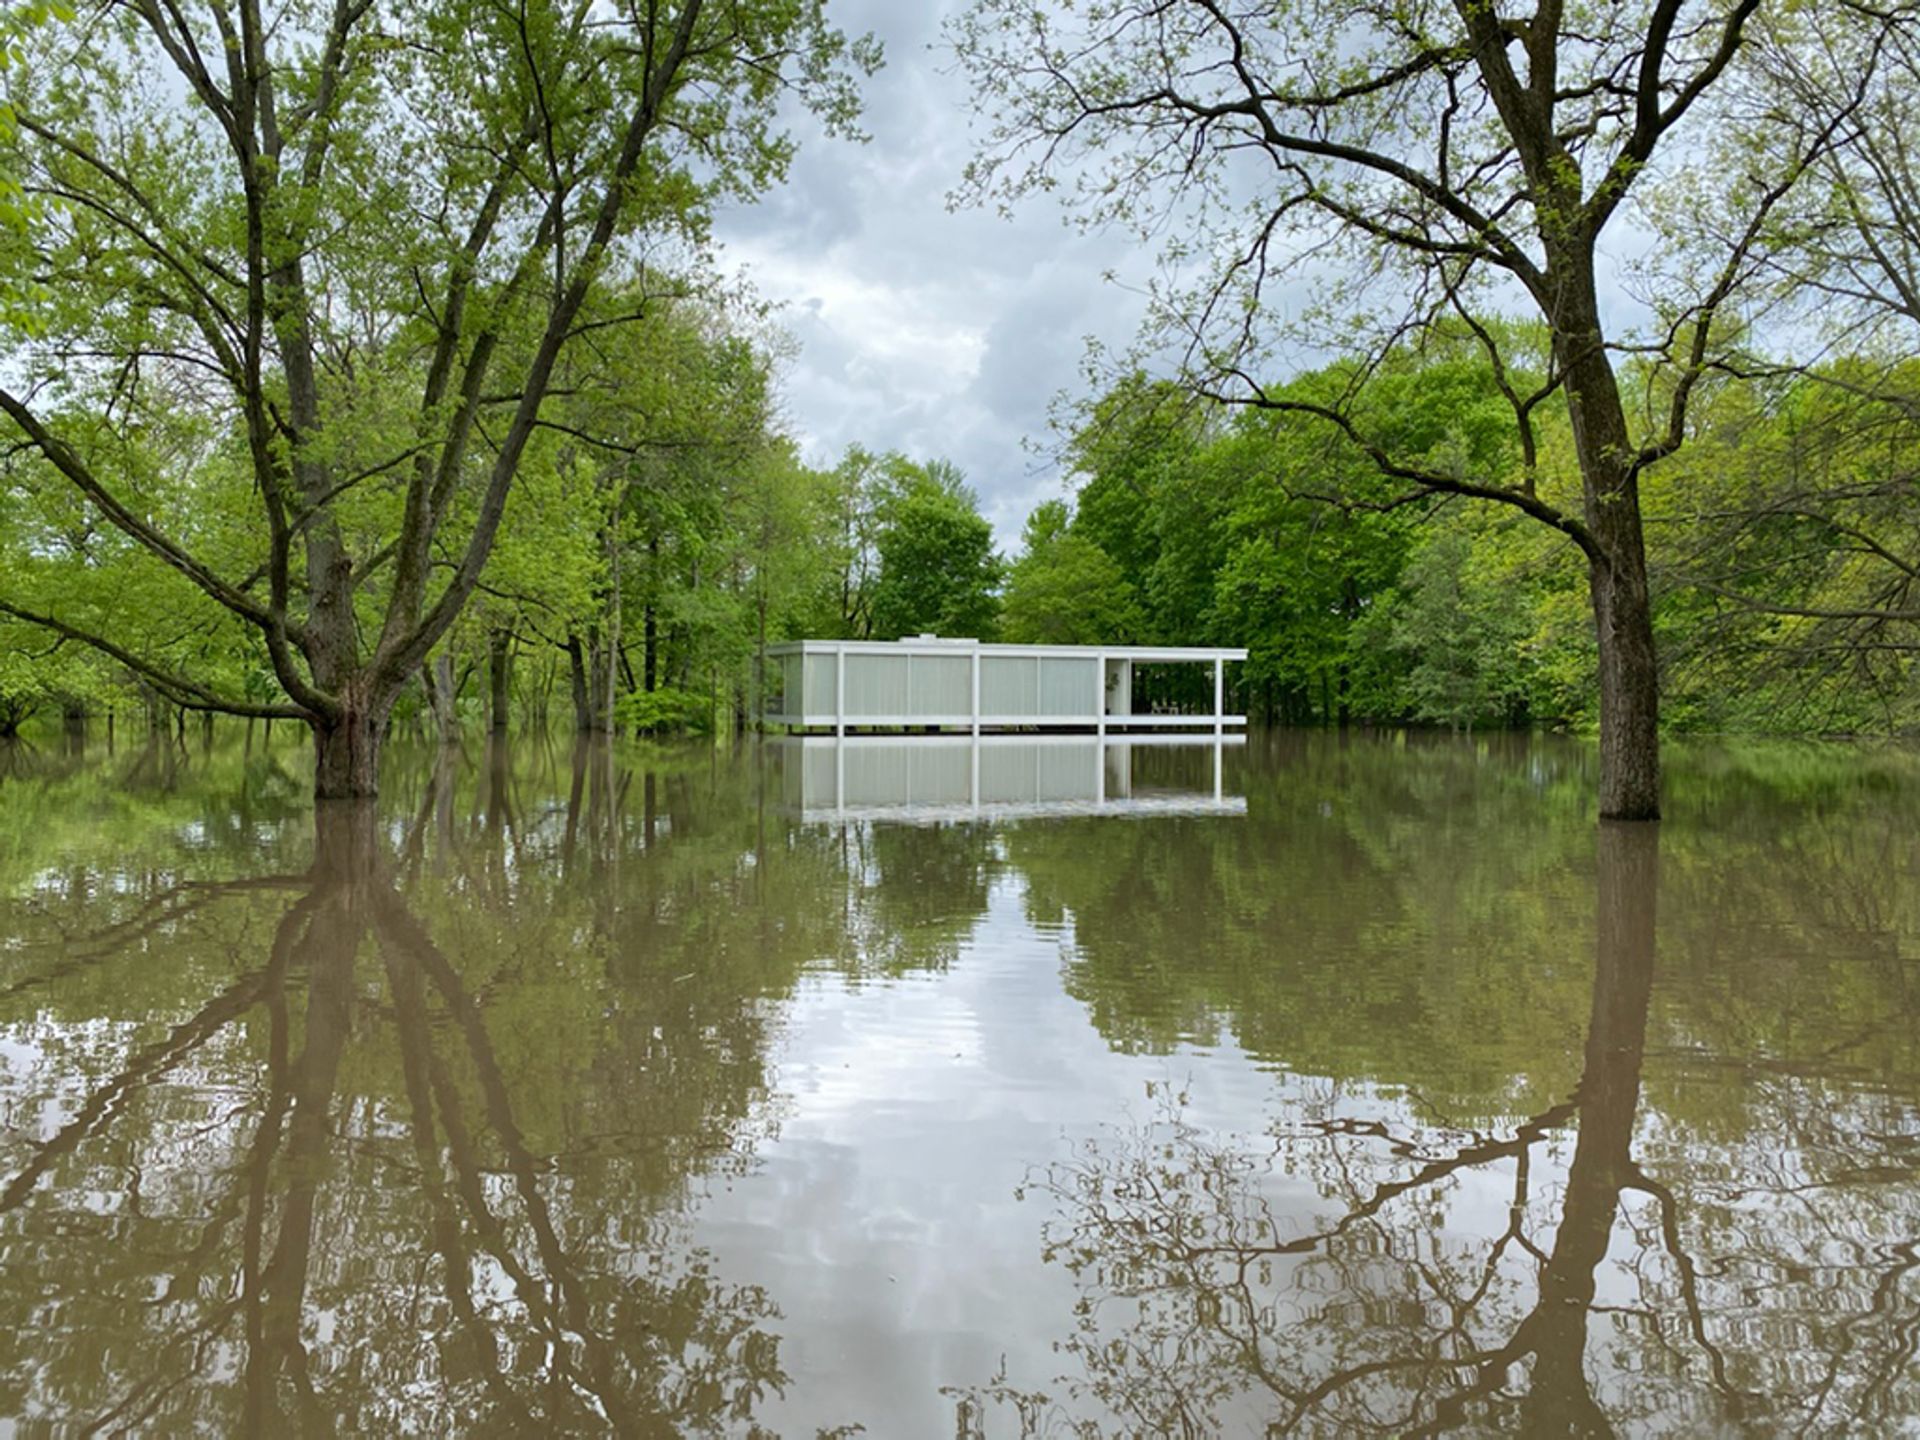 Flooding earlier this week at the Farnsworth House in Plano, Illinois along the Fox River. Farnsworth House